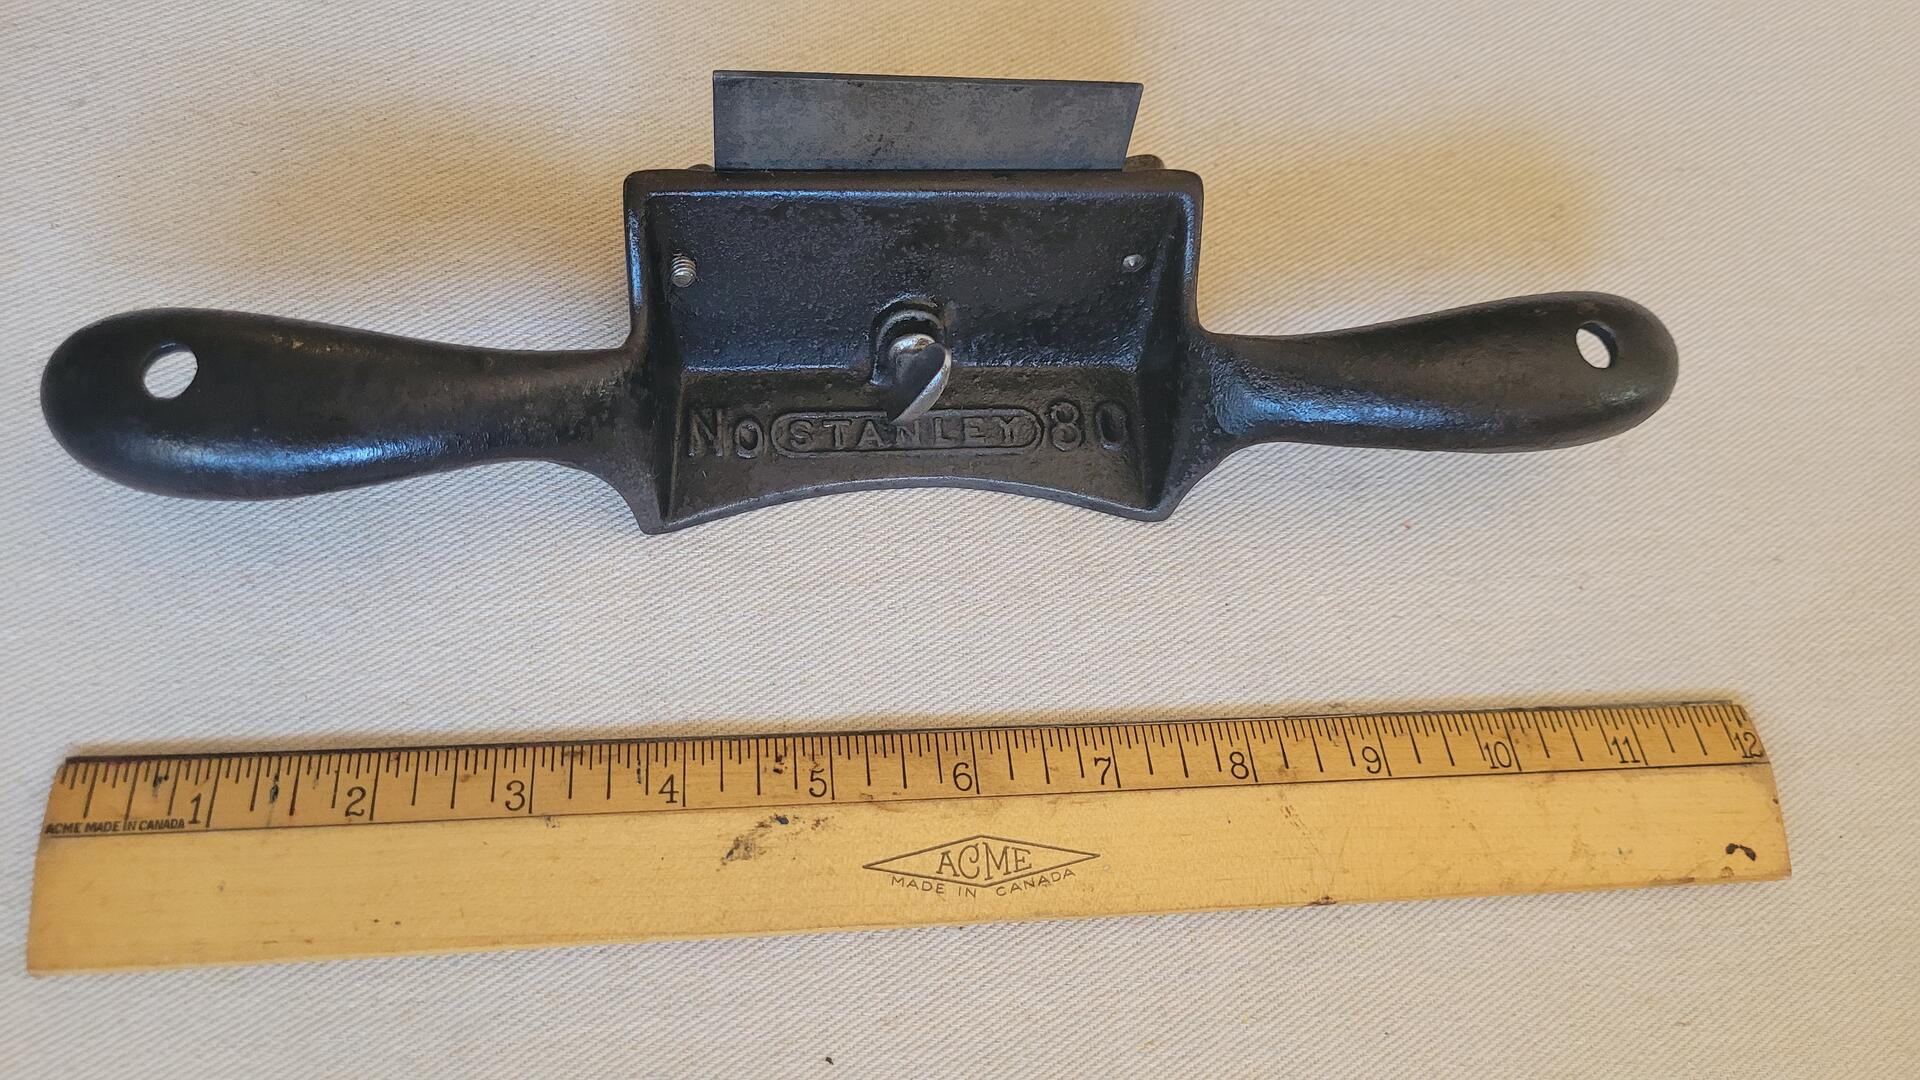 Antique Stanley 80 cabinet scraper plane spoke shave with blade. Vintage made in USA collectible cabinet maker, carpentry and woodworking hand tools